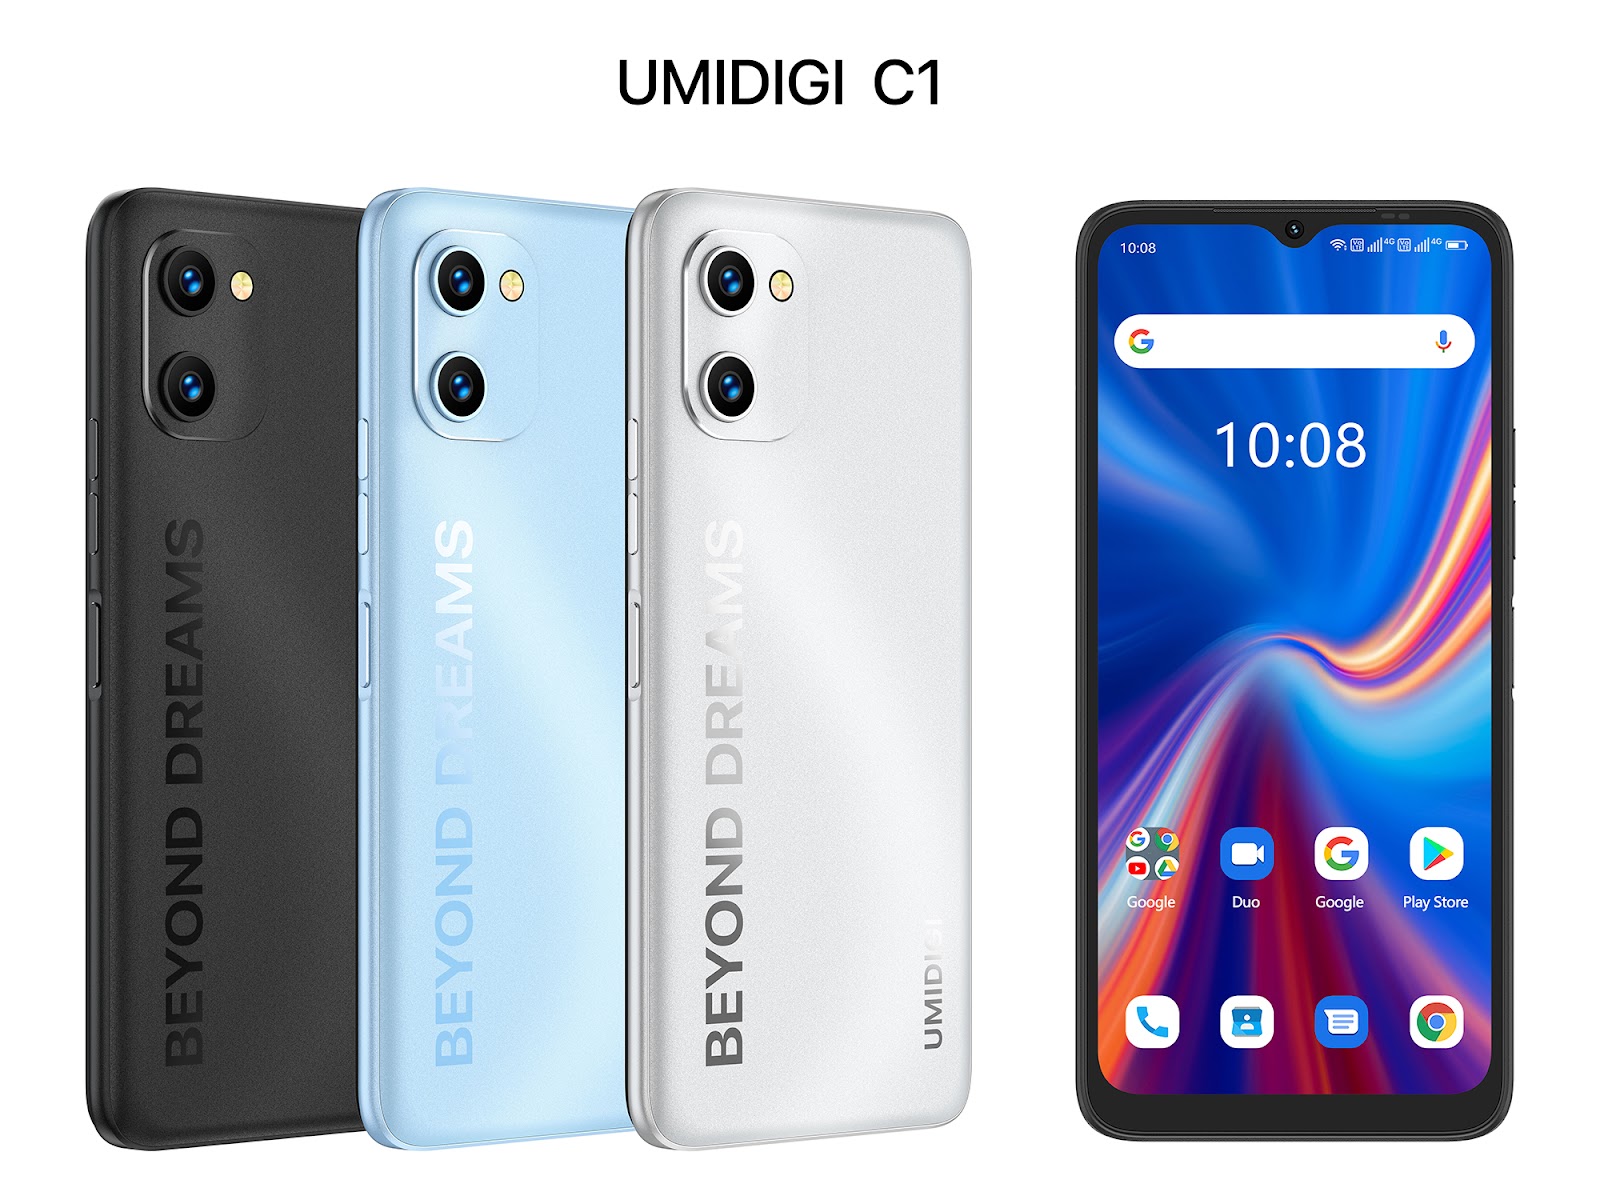 UMIDIGI Bison 2, along with the C1 and G1 series to launch soon img 62a066652286b